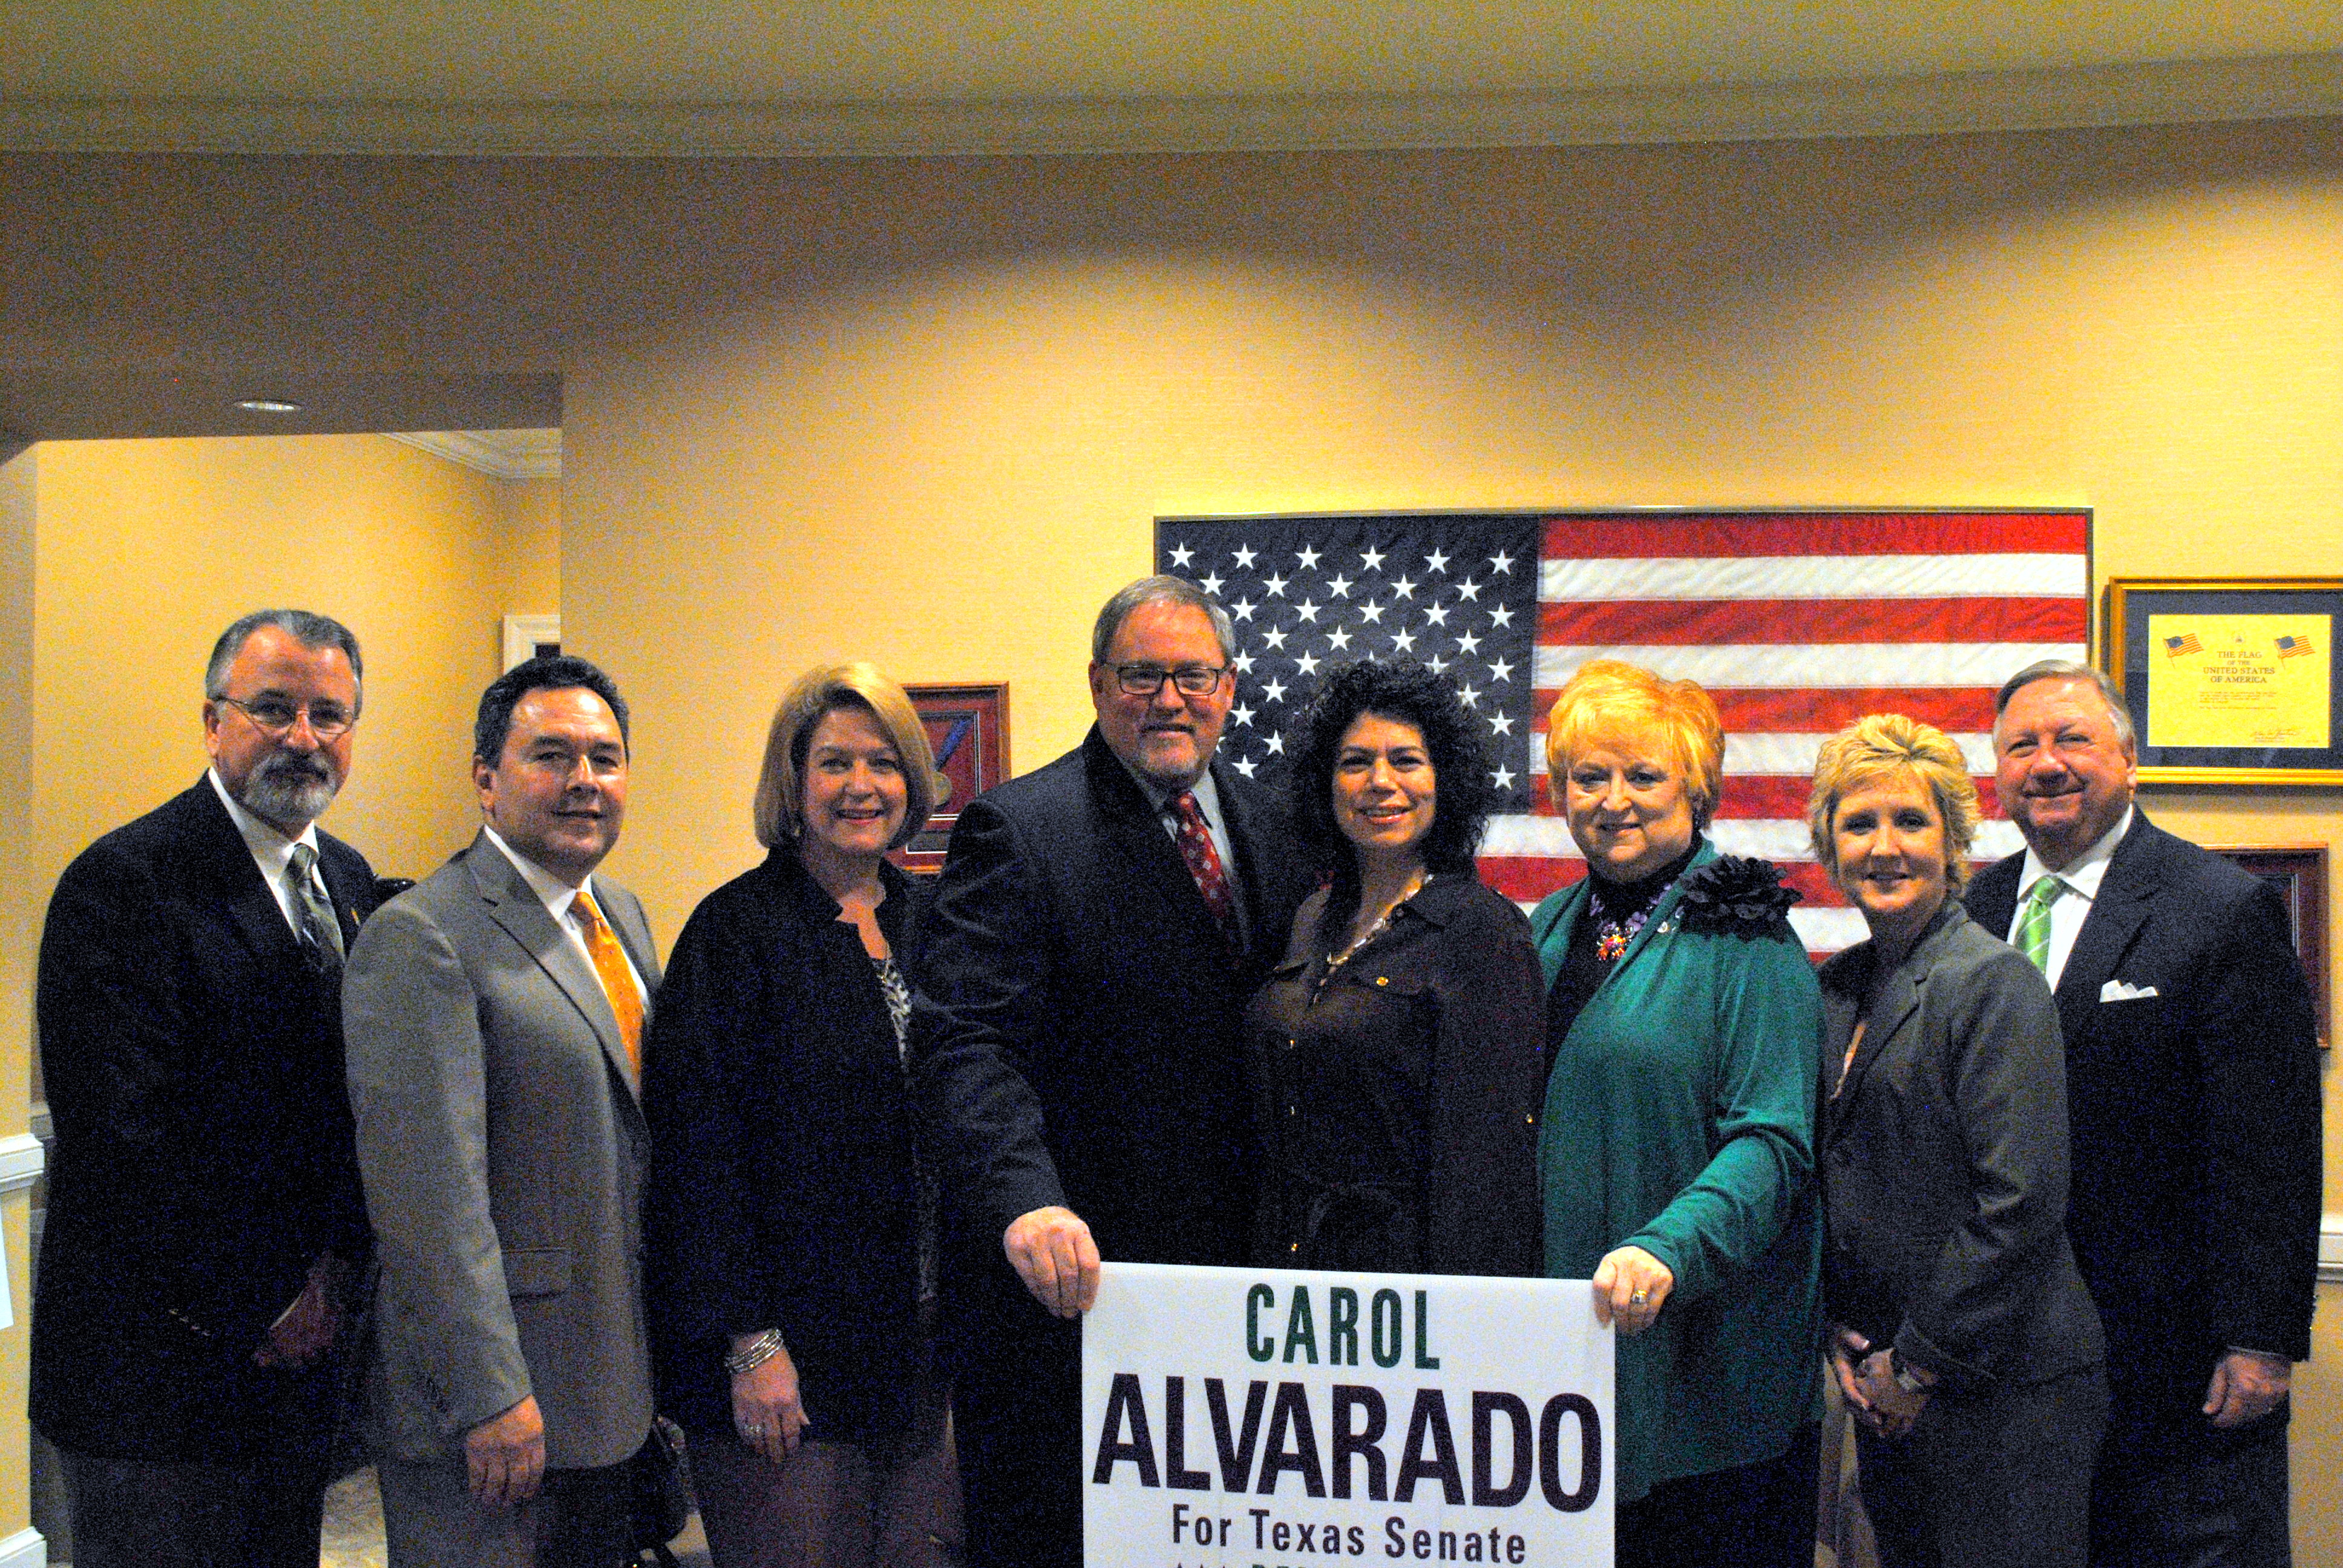 HAR Recommended Candidate Carol Alvarado with Bob Hale and HAR's Executive Committee